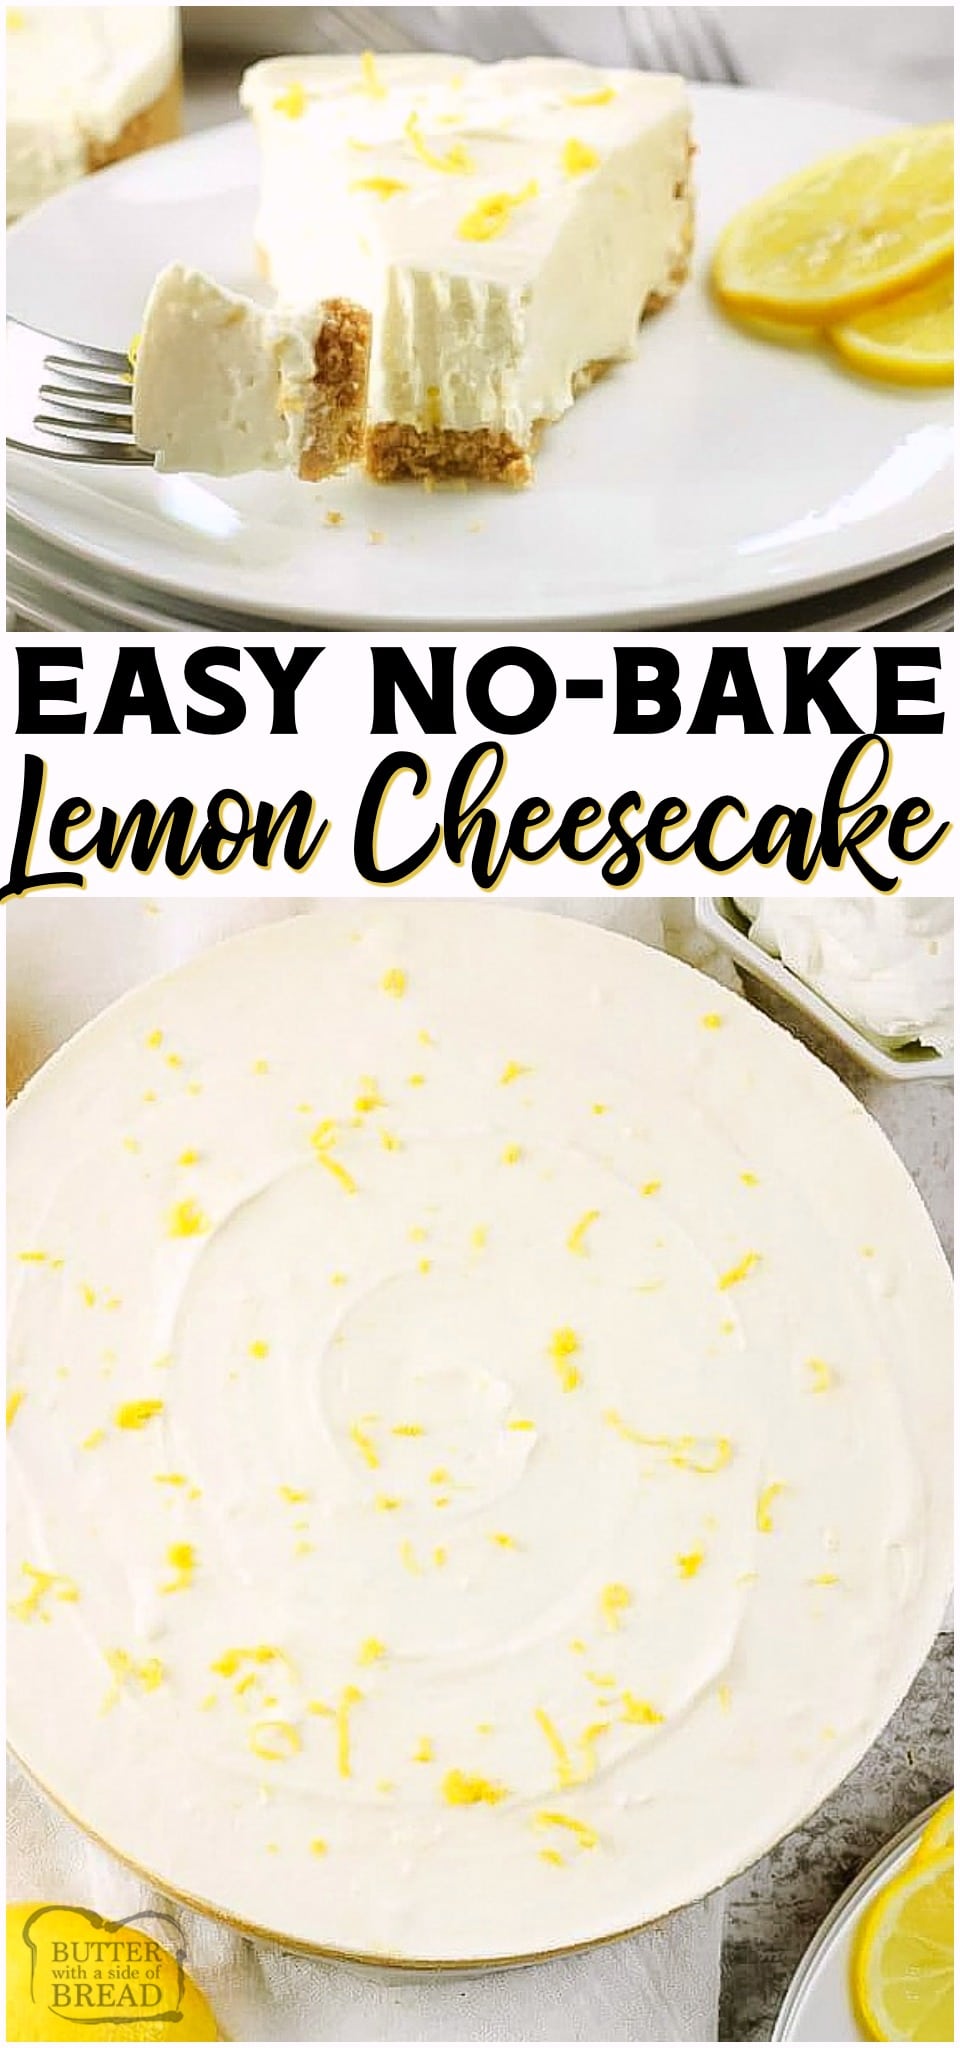 No Bake Lemon Cheesecake is a simple no bake dessert with only a few ingredients! Easy Lemon Cheesecake recipe with bright, fresh lemon flavor in a creamy no-bake cheesecake. #lemon #cheesecake #nobake #dessert #easyrecipe #recipe from BUTTER WITH A SIDE OF BREAD